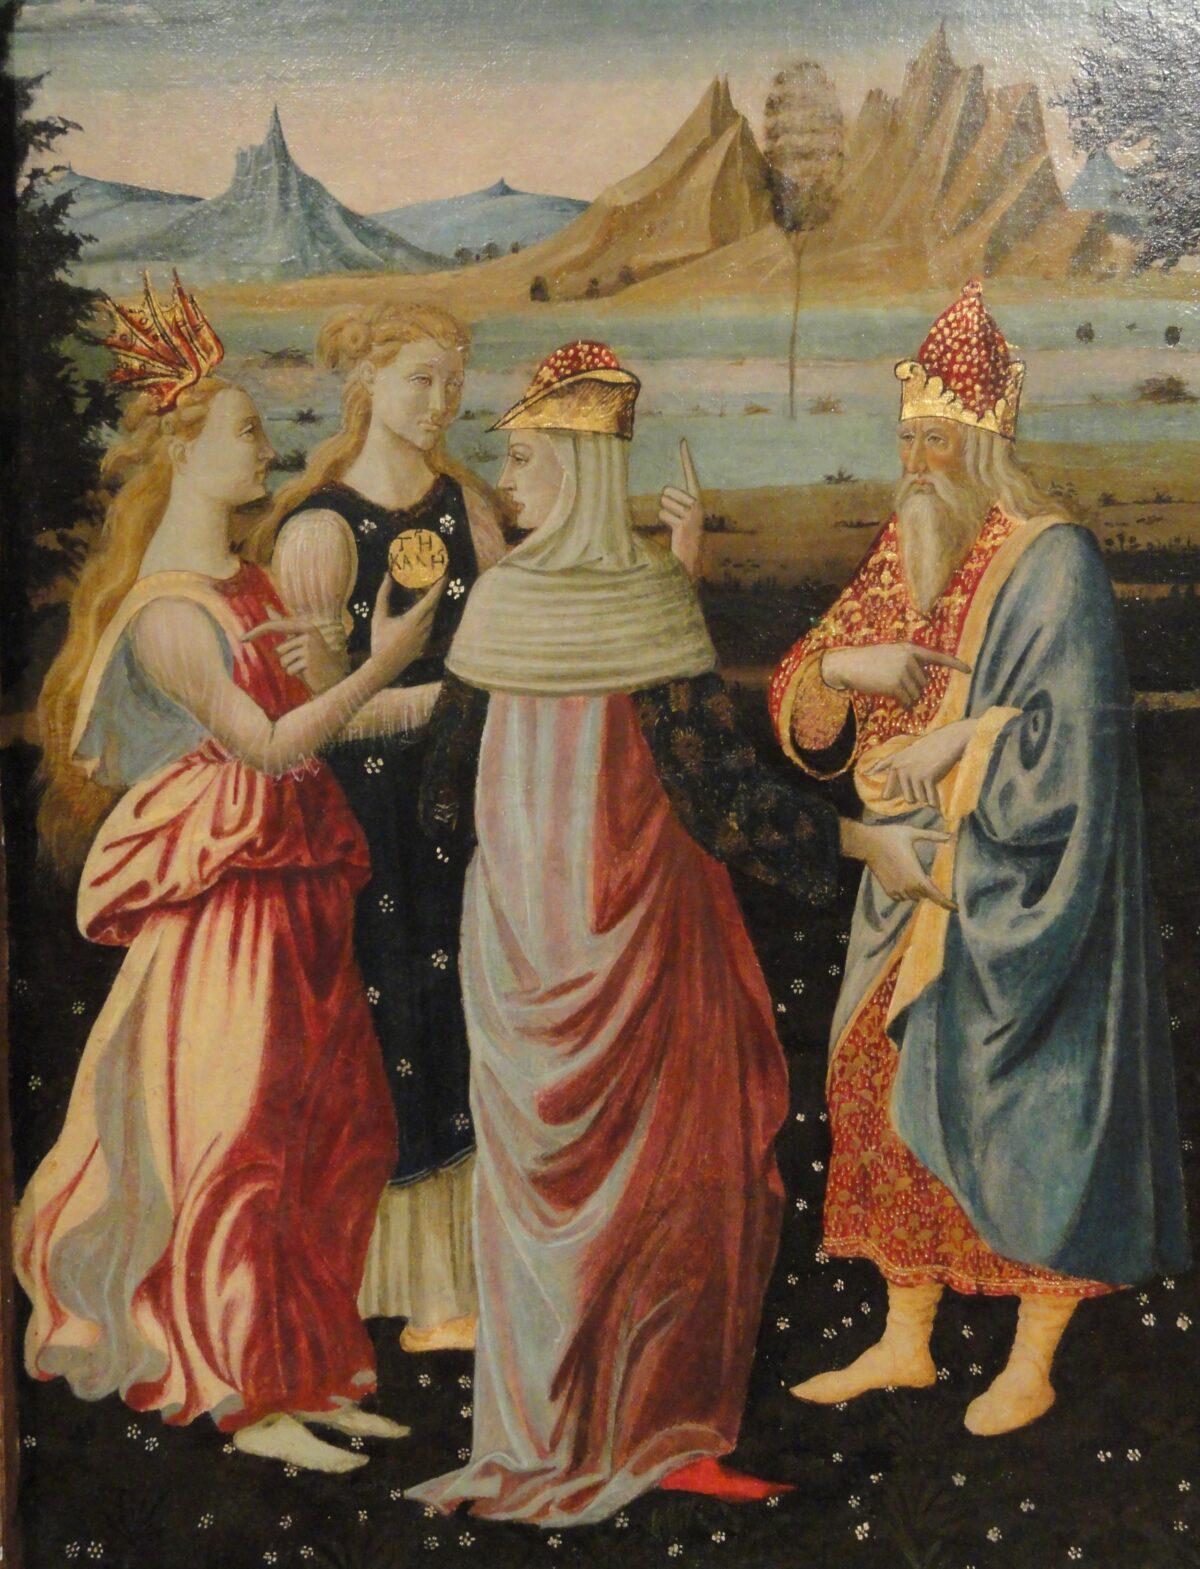 Three Greek goddesses are directed by Zeus to let Paris judge who is most beautiful. A detail from “Judgment of Paris,” circa 1480, by Master of the Argonaut Panels. Fogg Museum. (Public Domain)